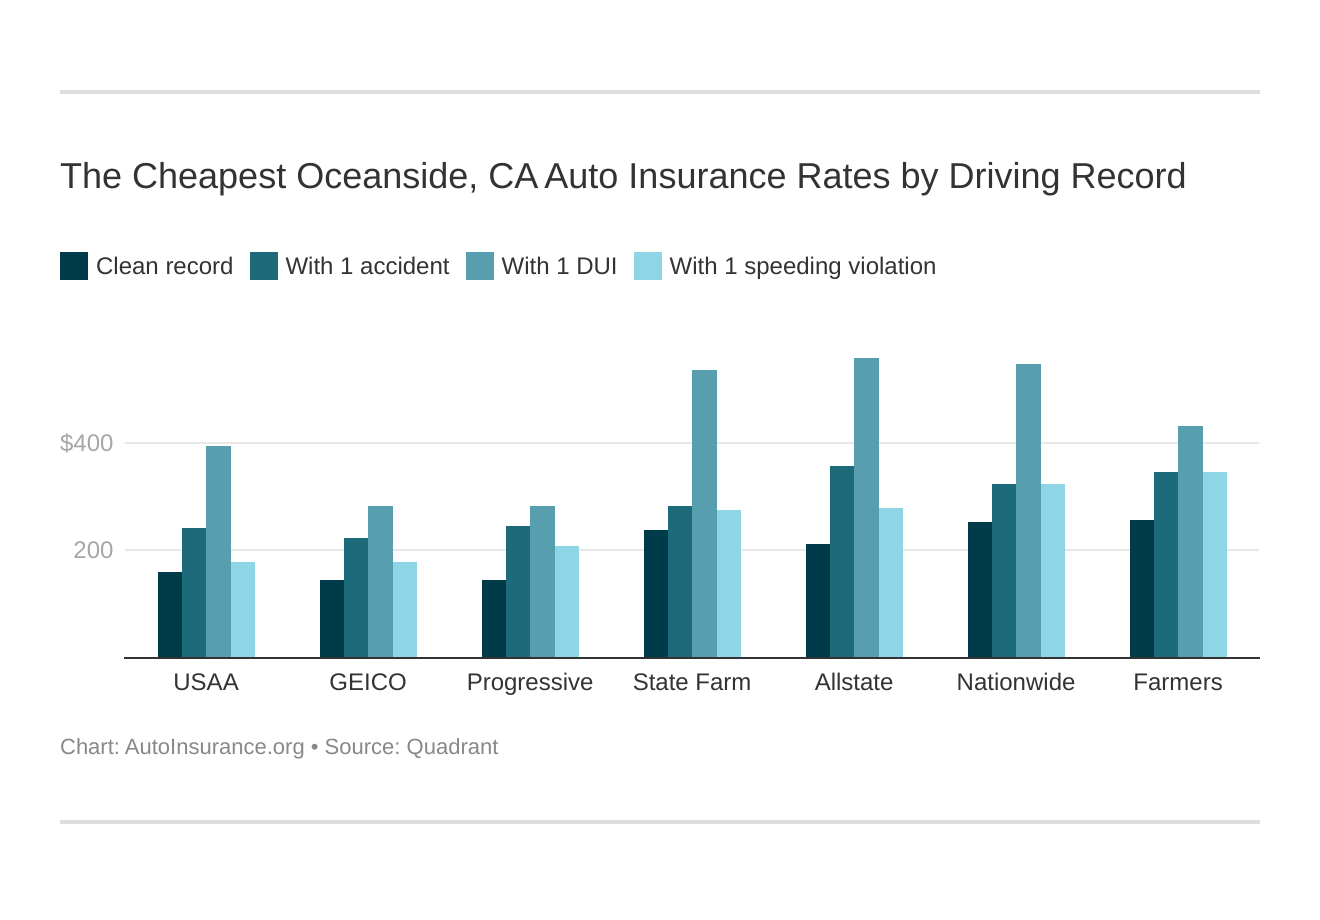 The Cheapest Oceanside, CA Auto Insurance Rates by Driving Record